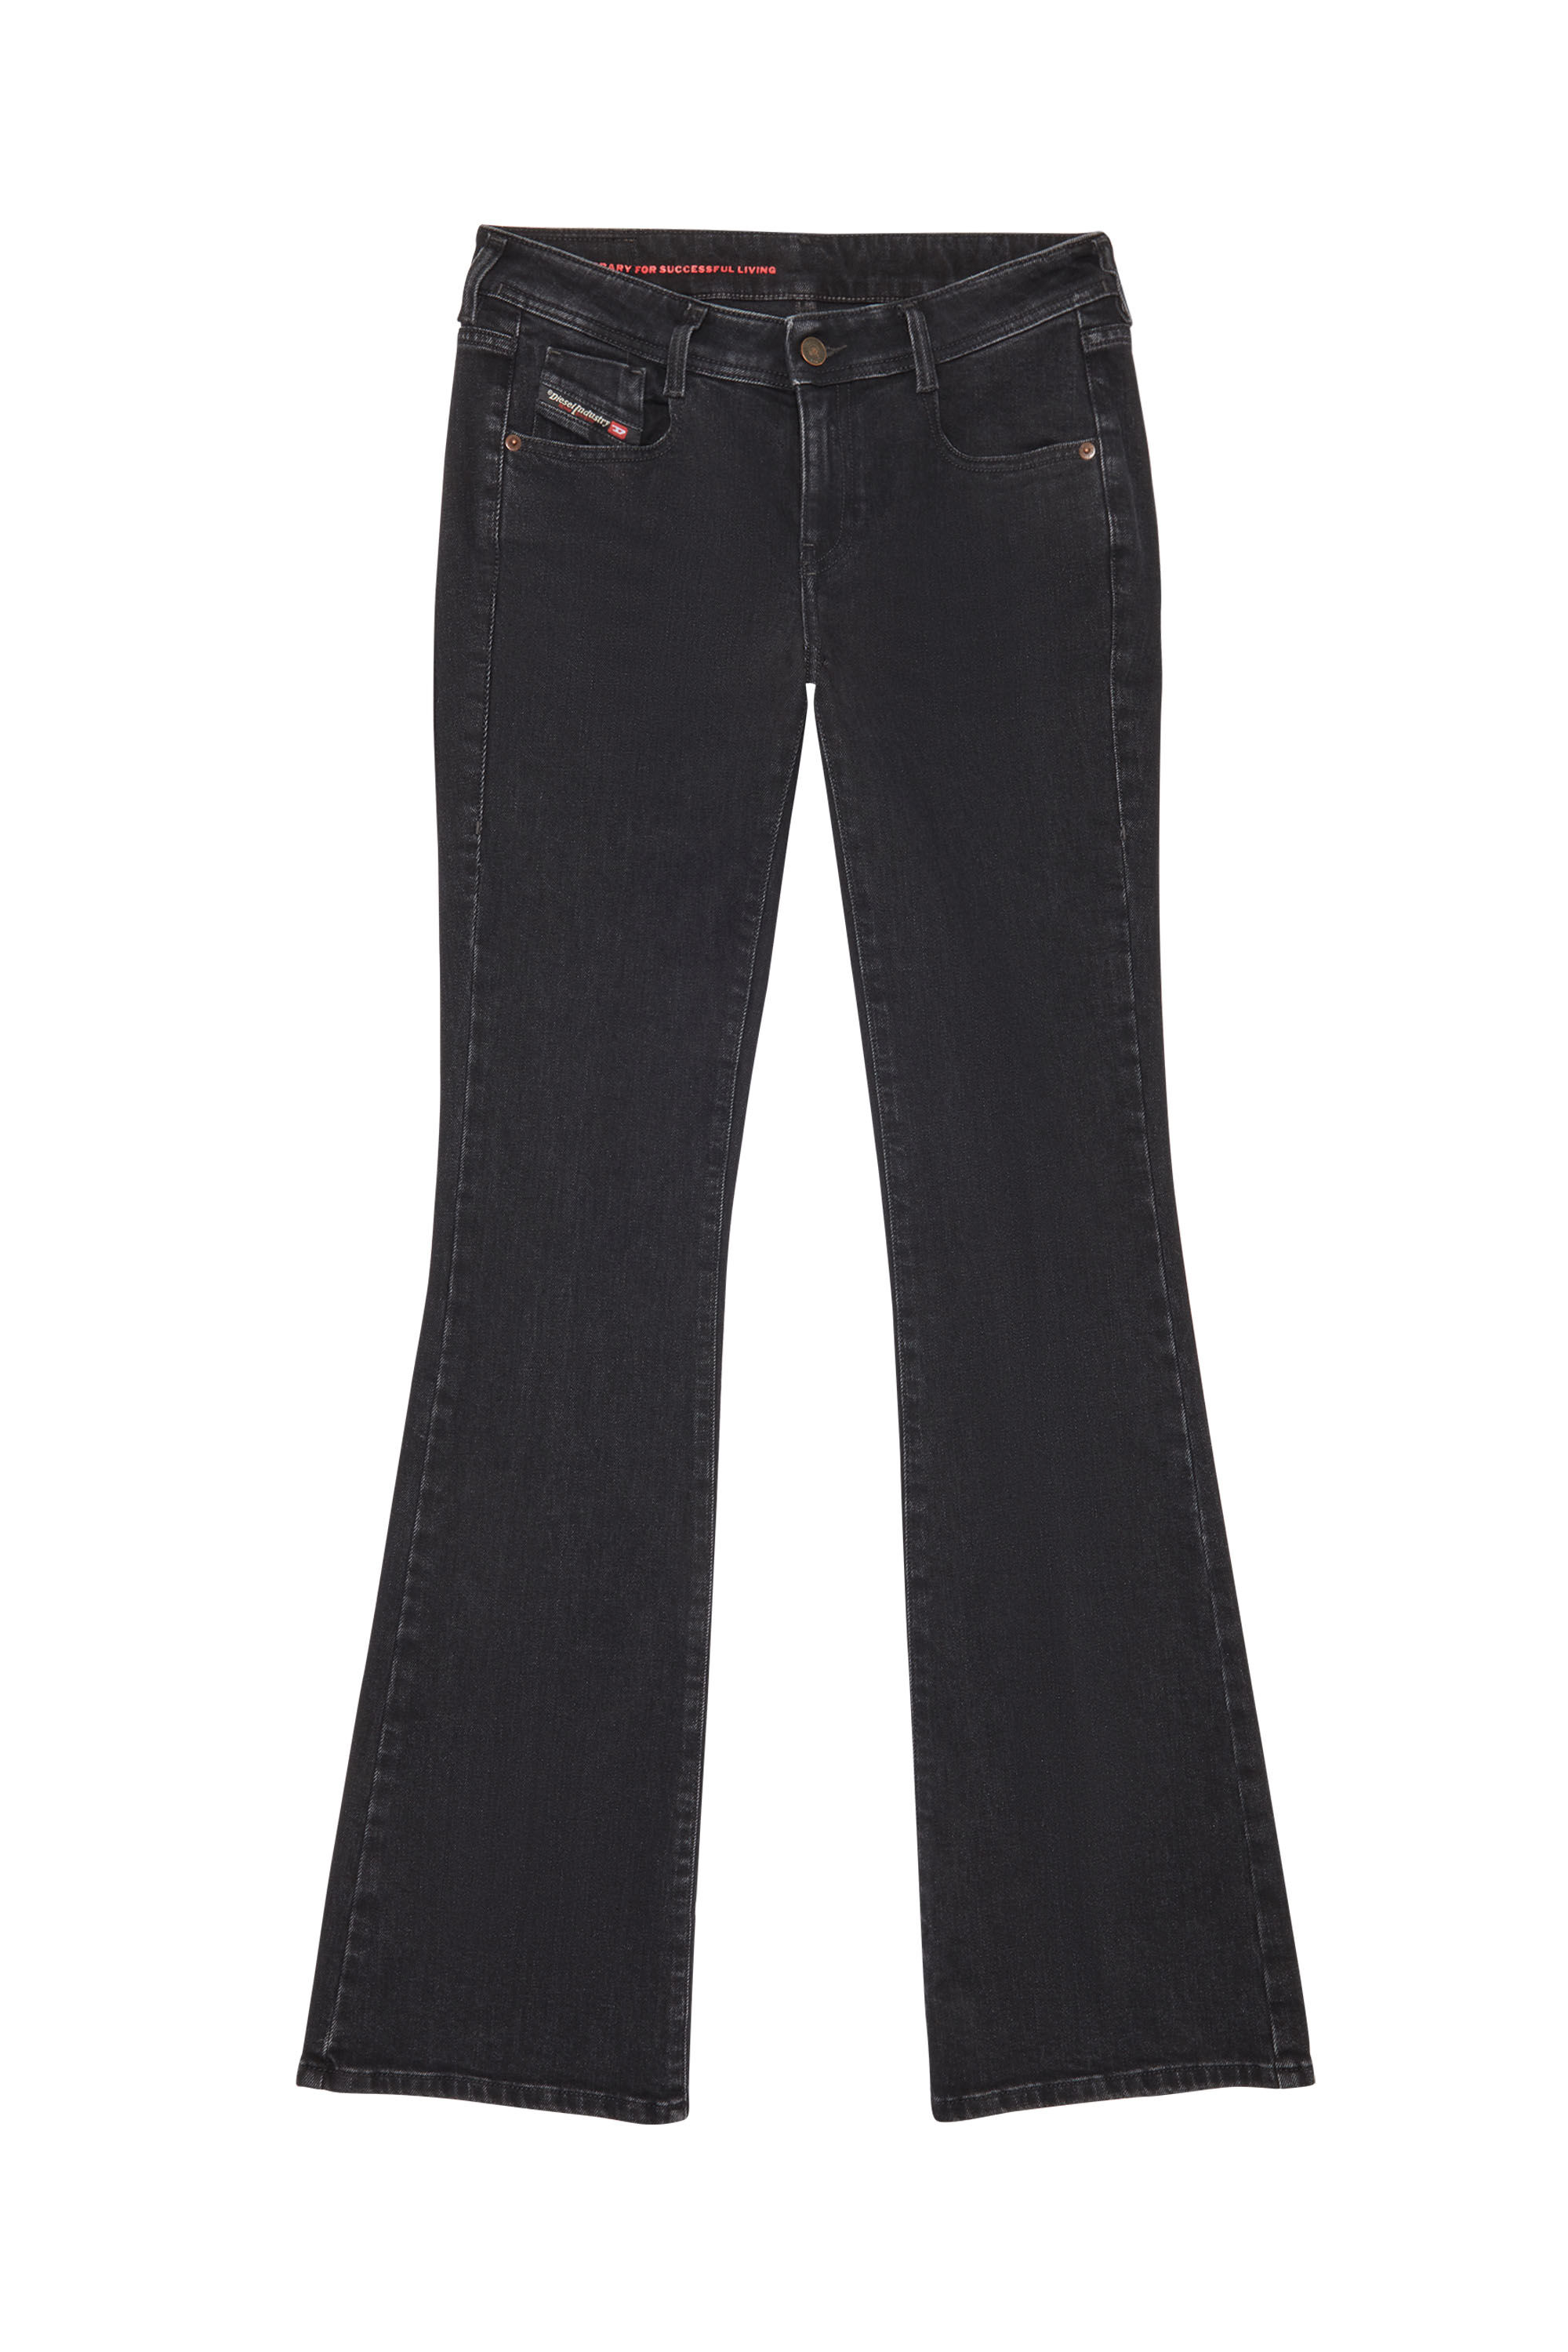 diesel.com | 1969 D-Ebbey Z9c25 Bootcut And Flare Jeans